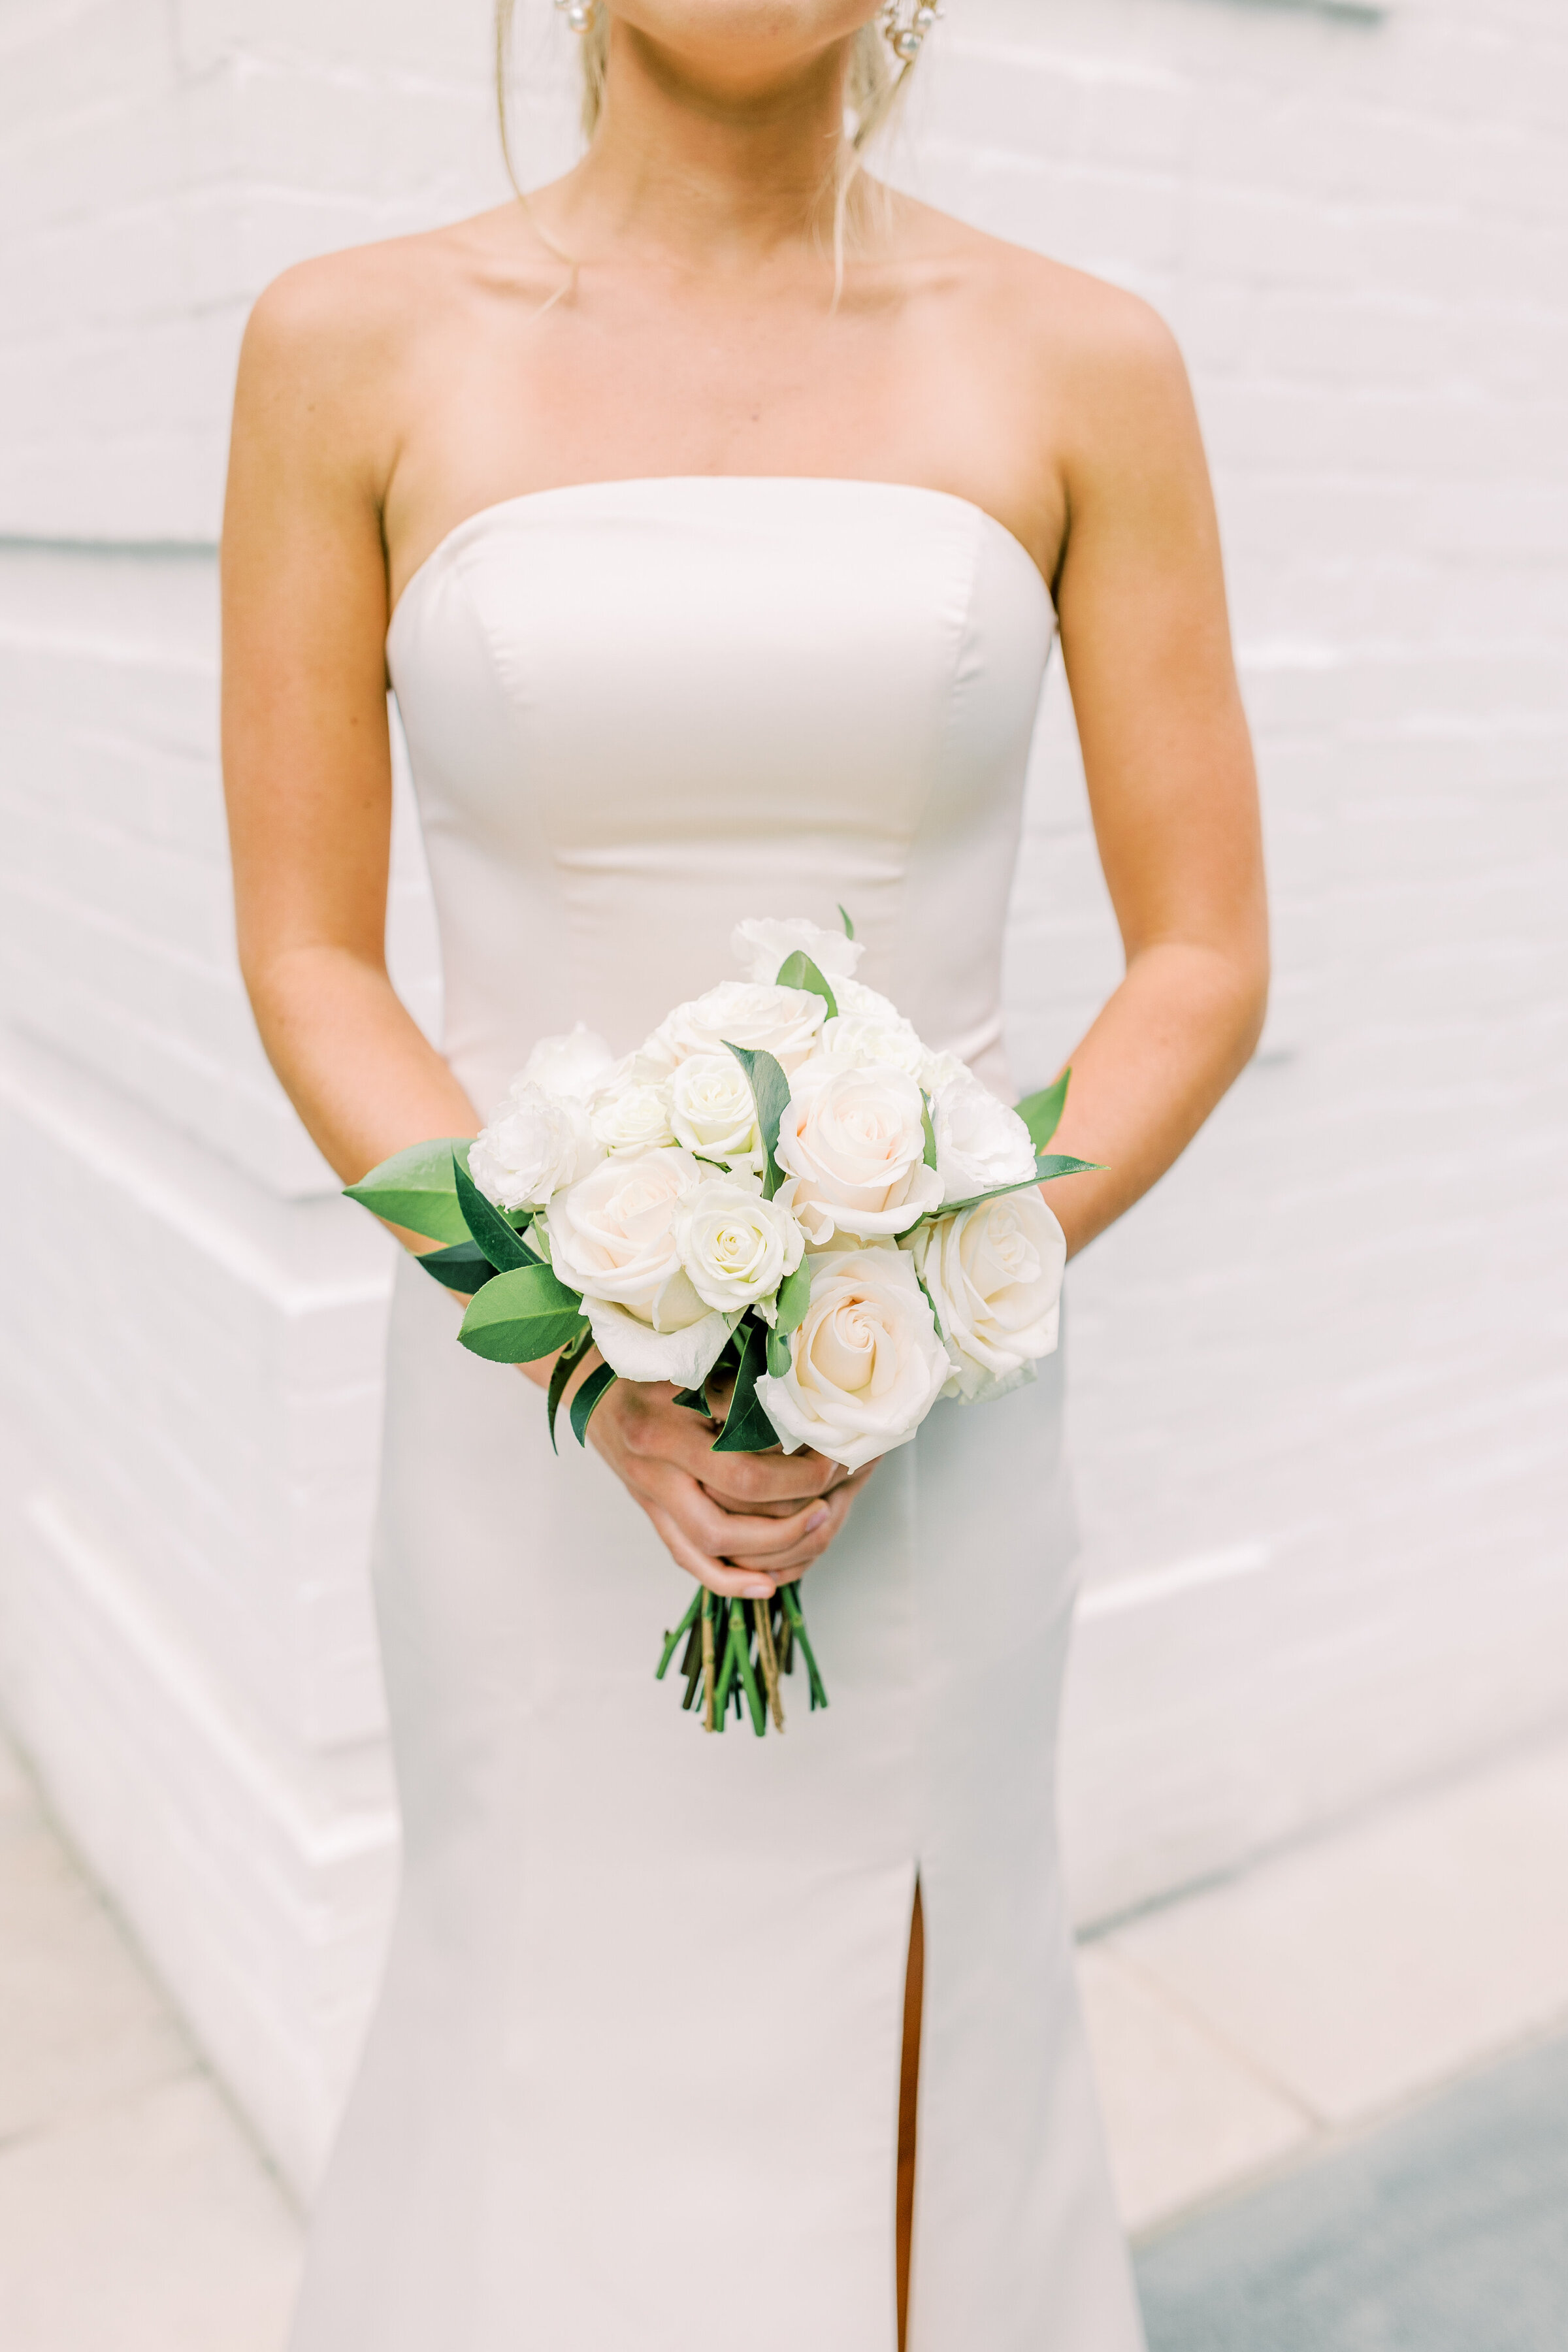 Bride in column style wedding dress holding white rose bouquet